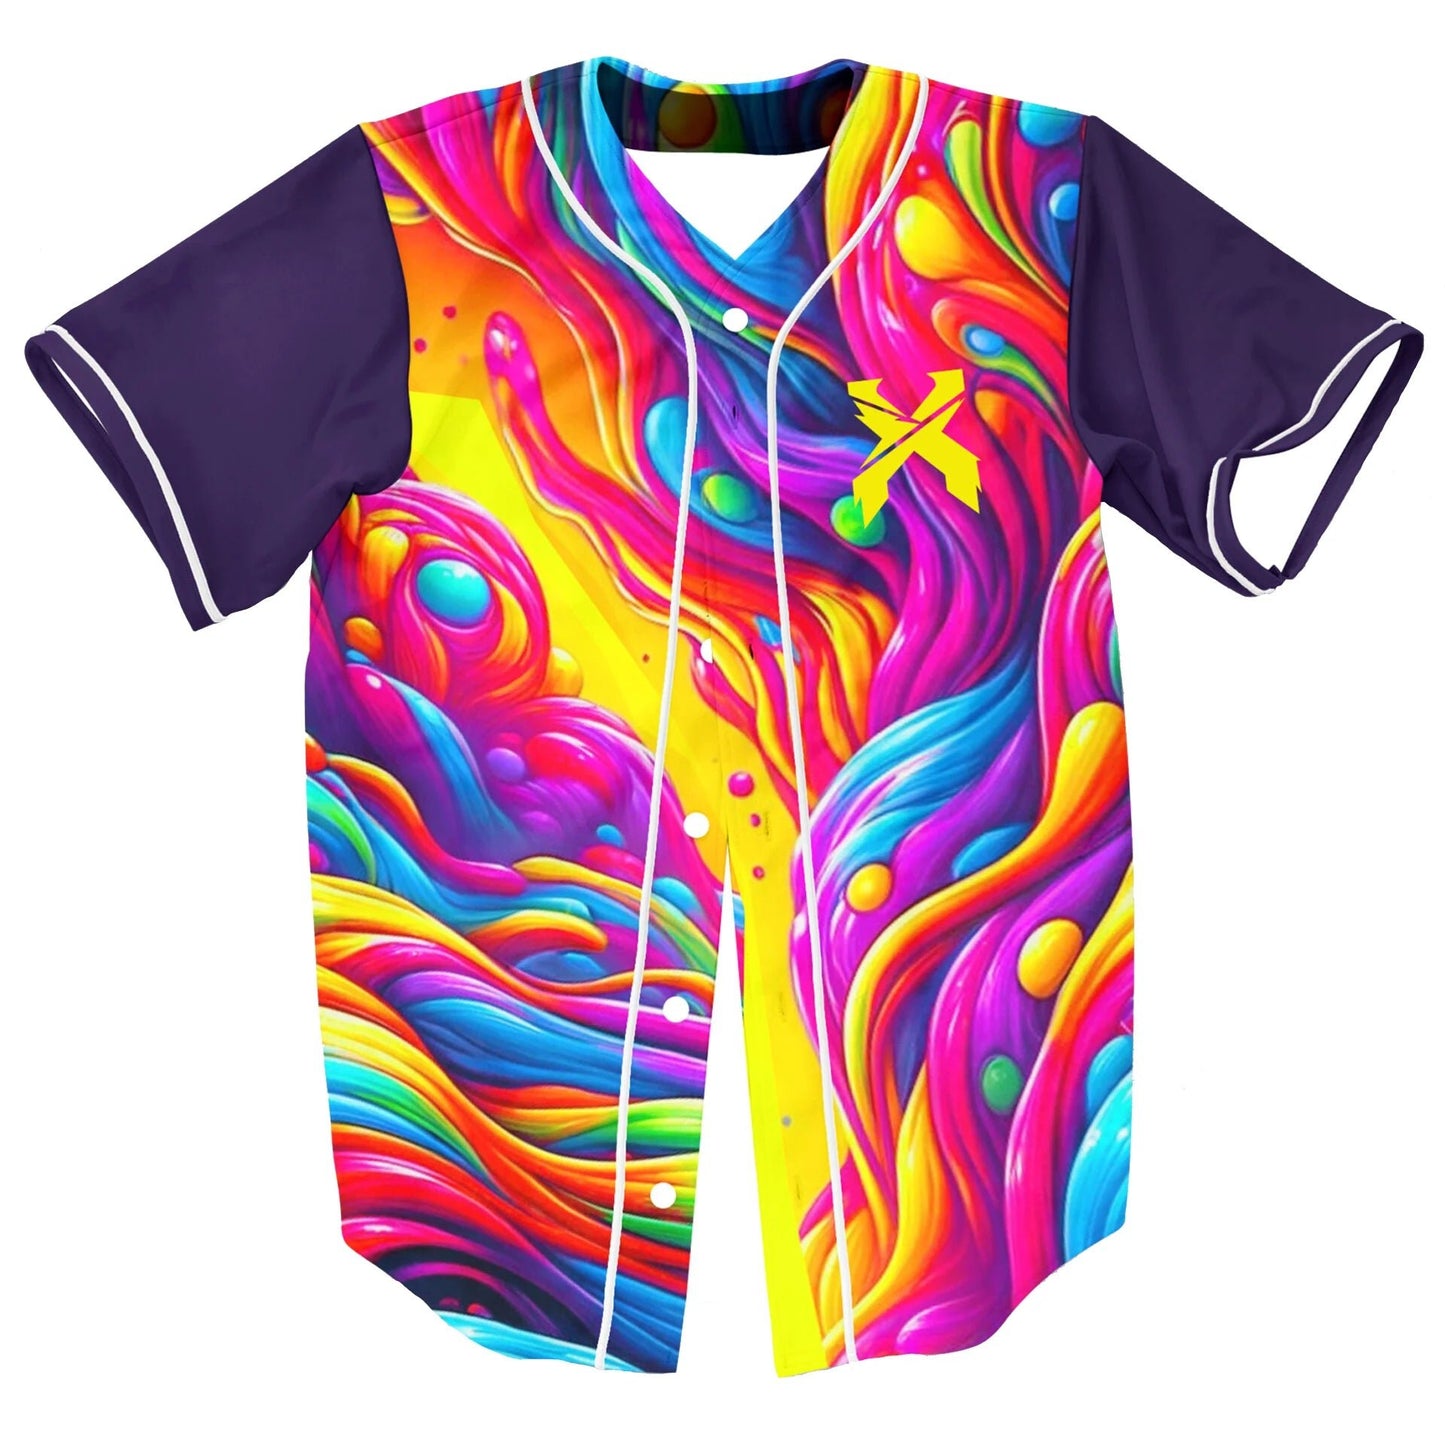 Excision Trippy Colorful Baseball Jersey - The Rave Cave